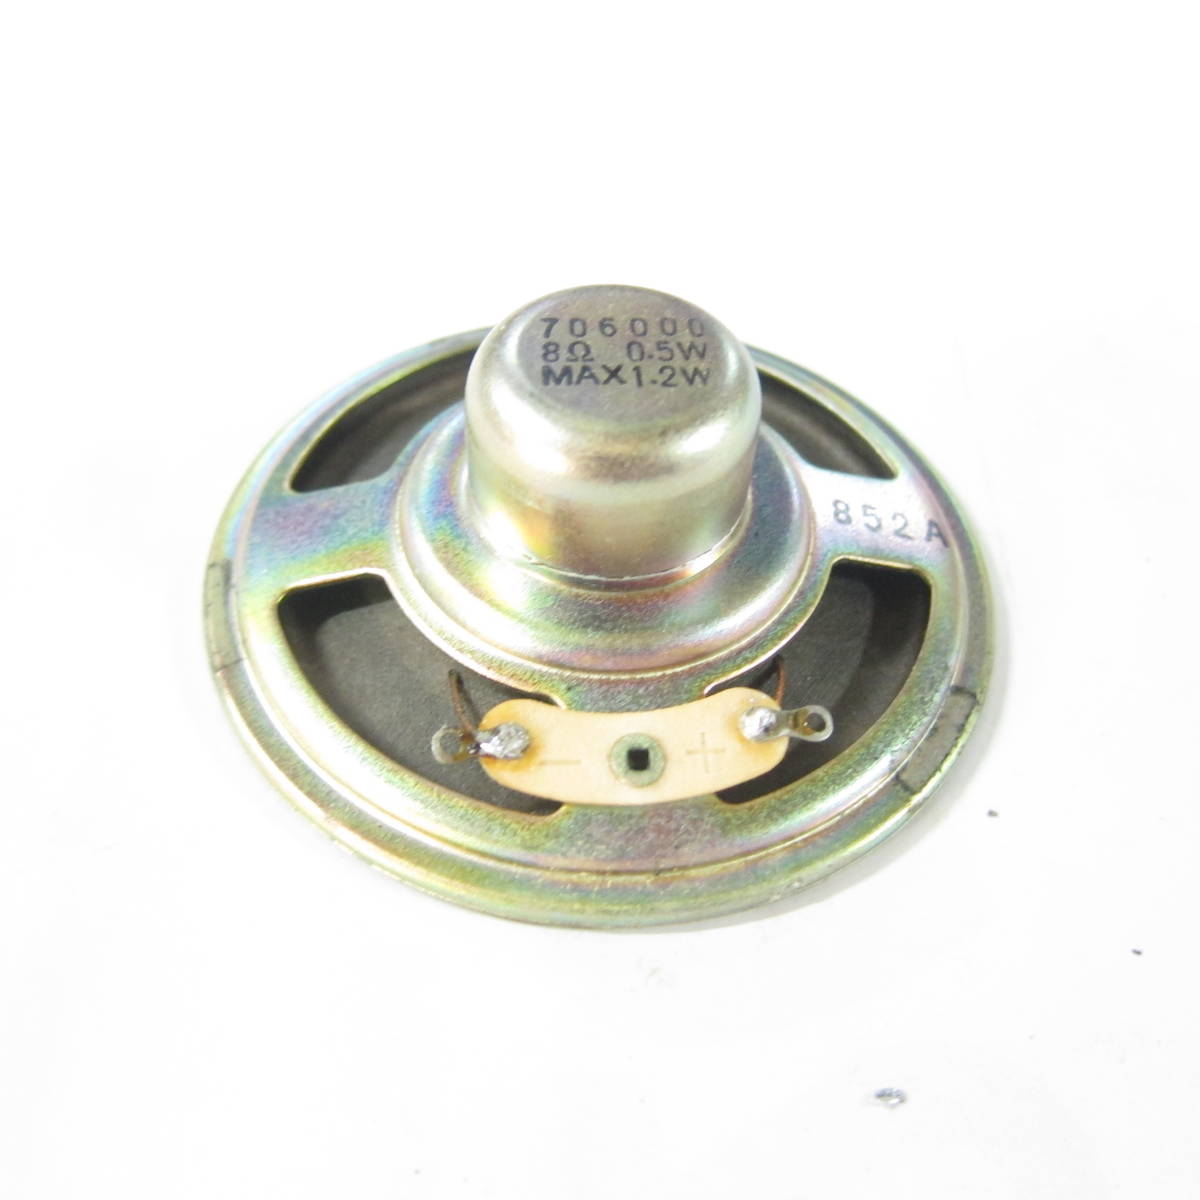 66mm small size speaker 0.5W8Ω radio from removal goods 10-40-1